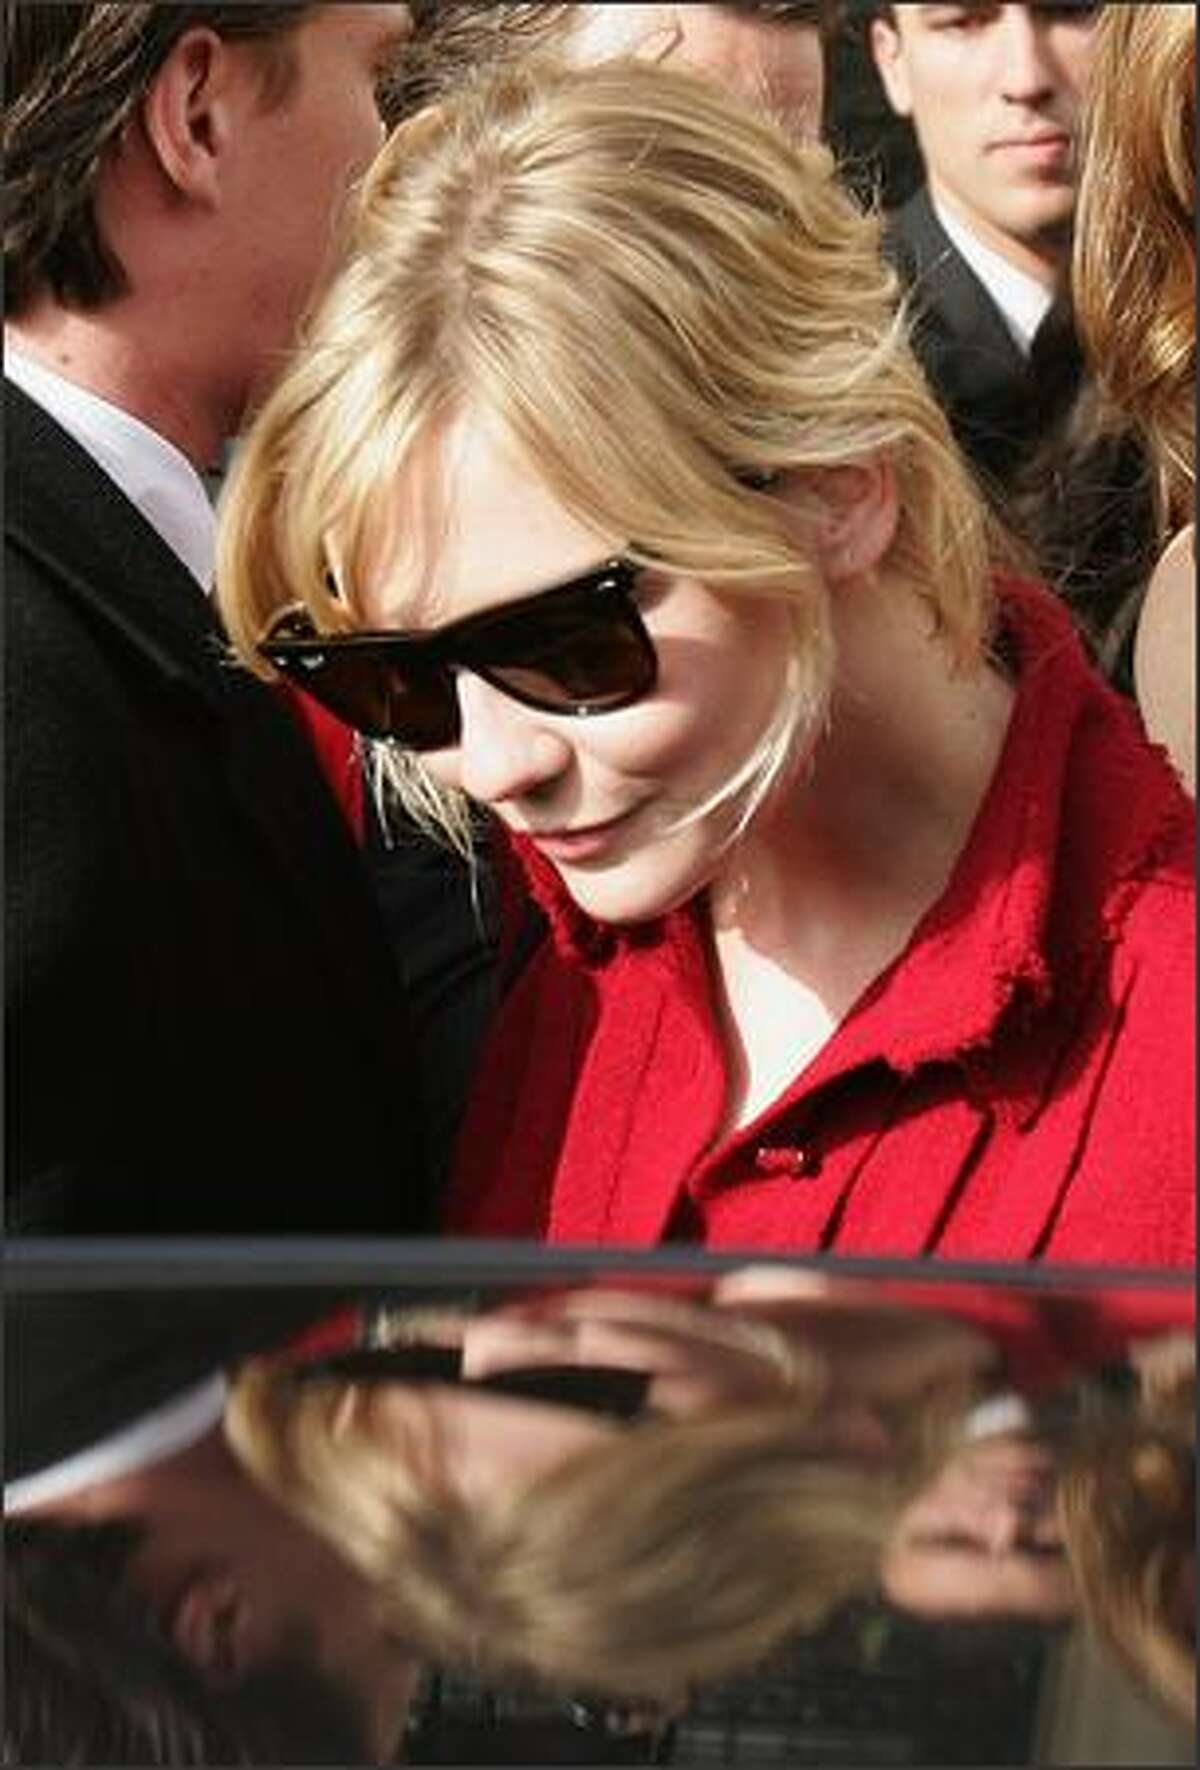 Actress Kirsten Dunst leaves after attending the Chanel Fashion show during the Paris Fashion Week Sp/Sum October 5, 2007 in Paris, France.